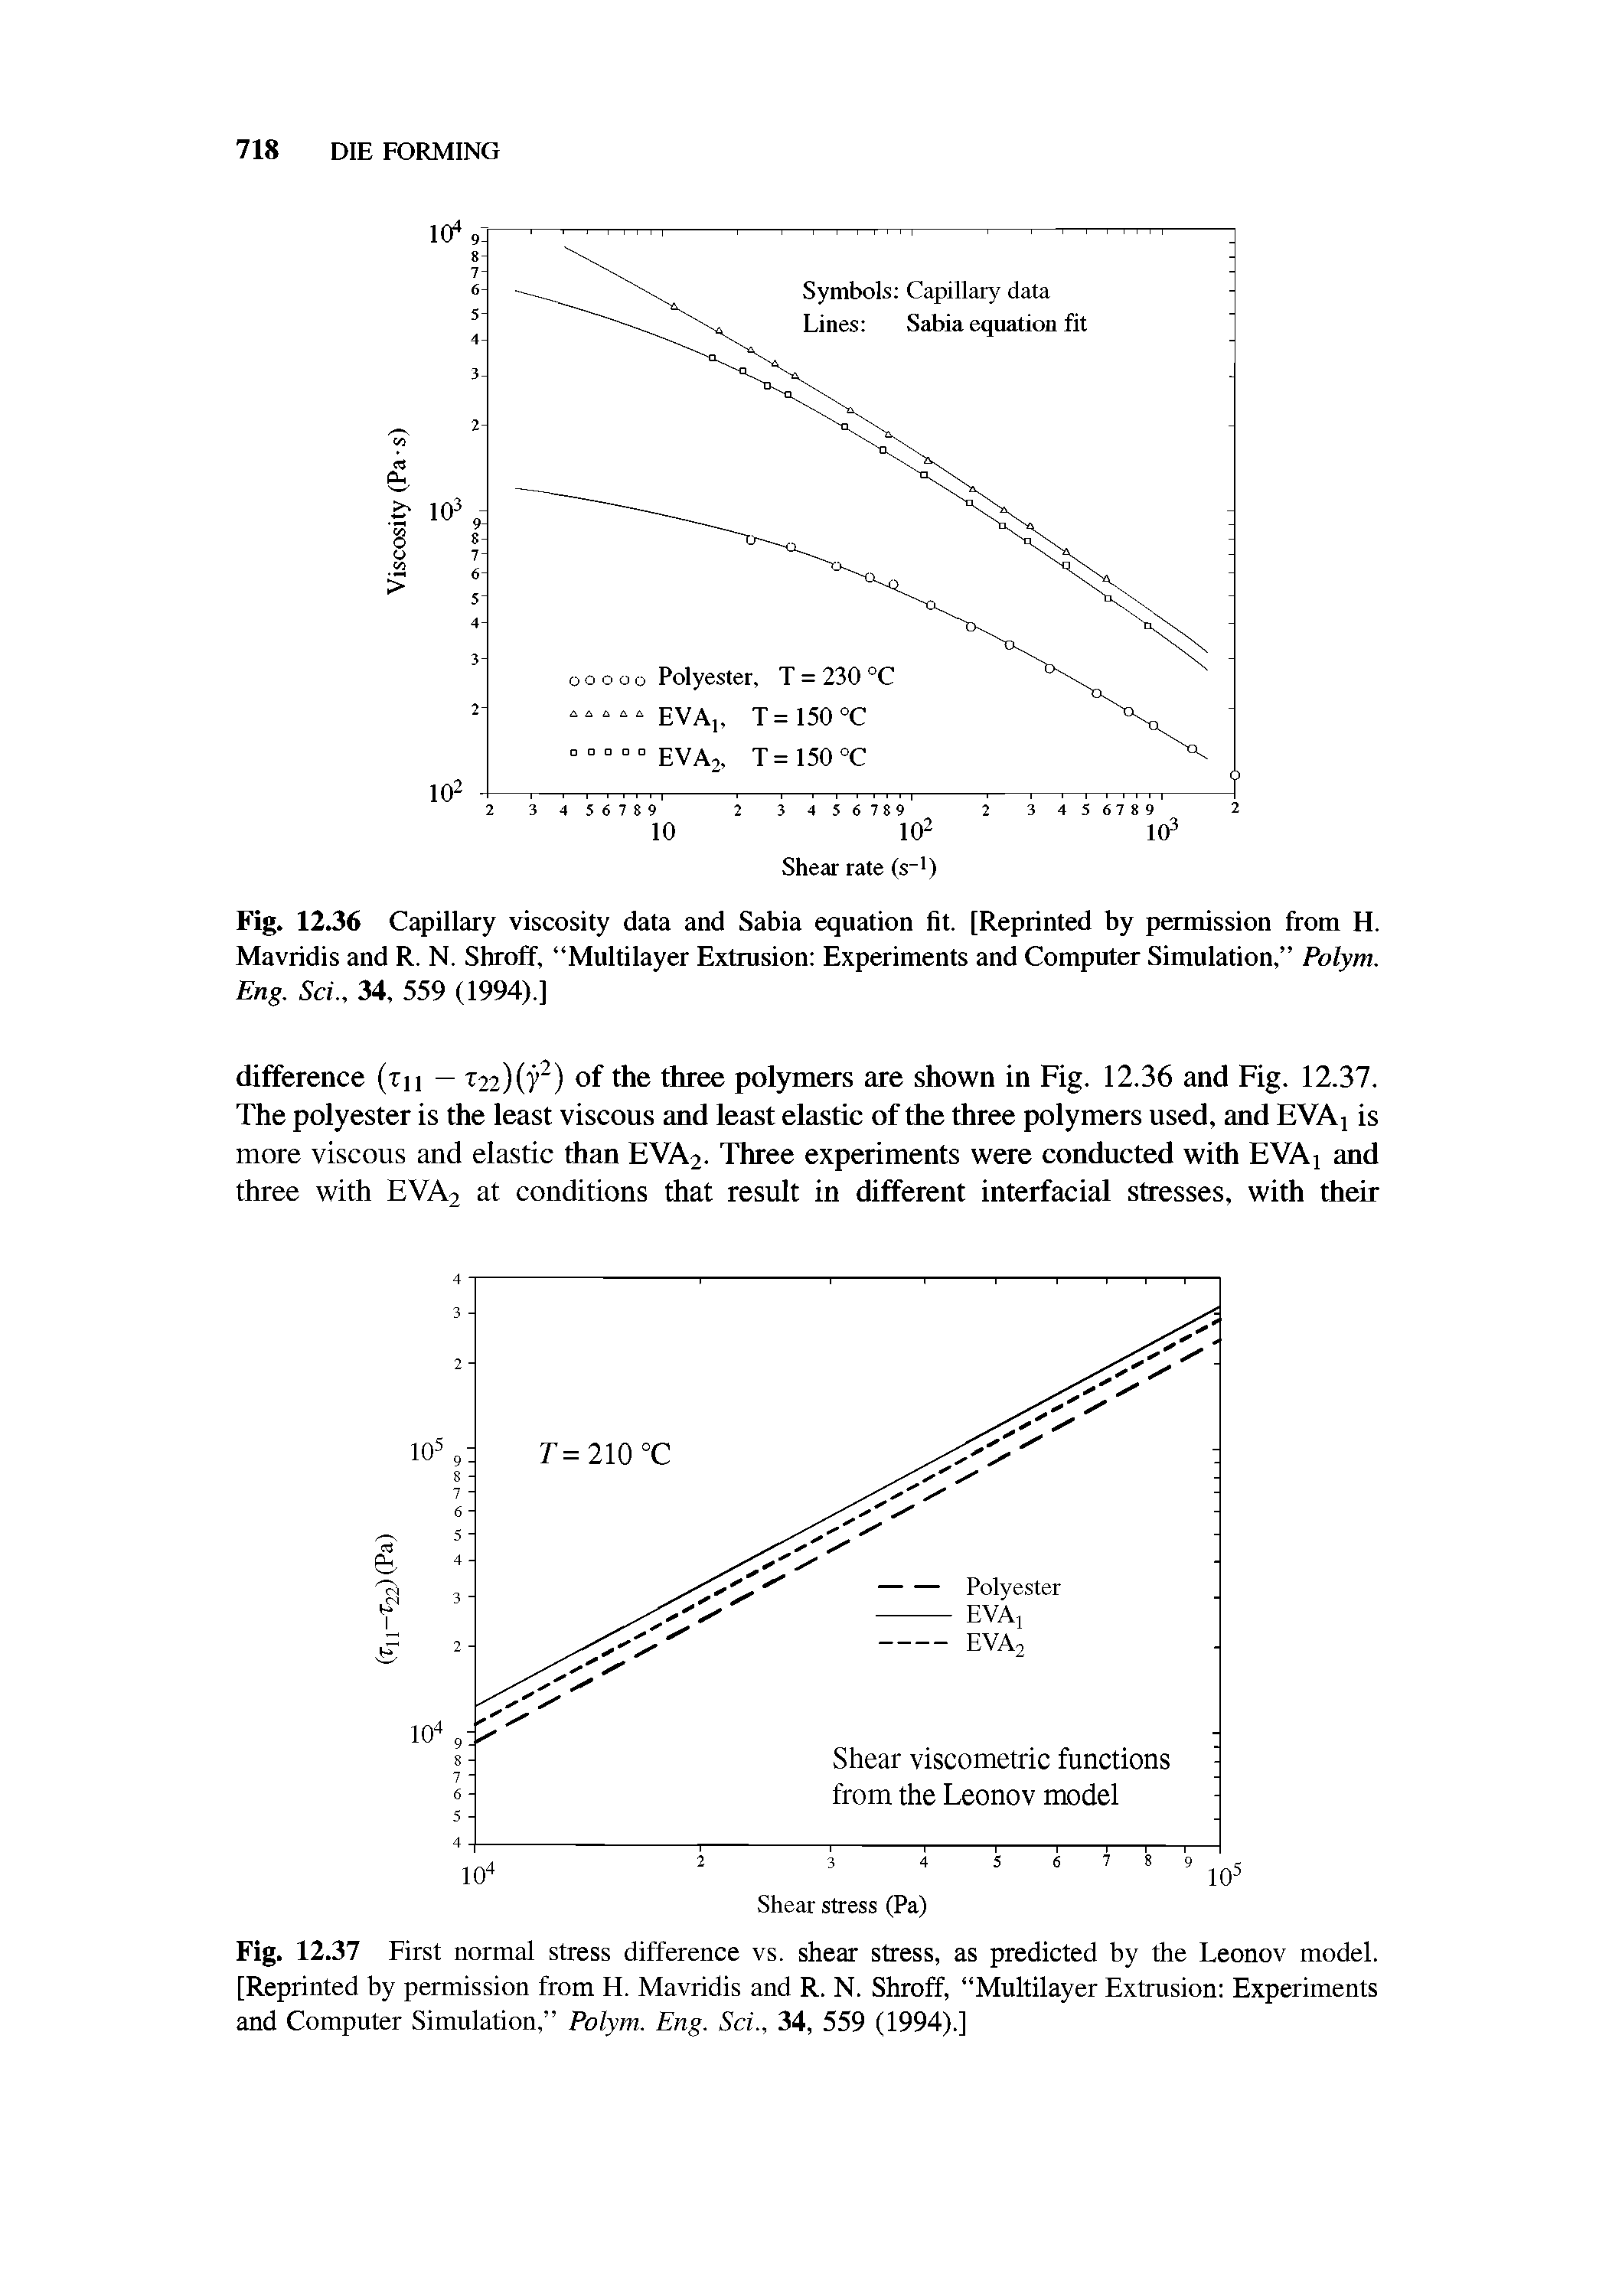 Fig. 12.37 First normal stress difference vs. shear stress, as predicted by the Leonov model. [Reprinted by permission from H. Mavridis and R. N. Shroff, Multilayer Extrusion Experiments and Computer Simulation, Polym. Eng. Sci., 34, 559 (1994).]...